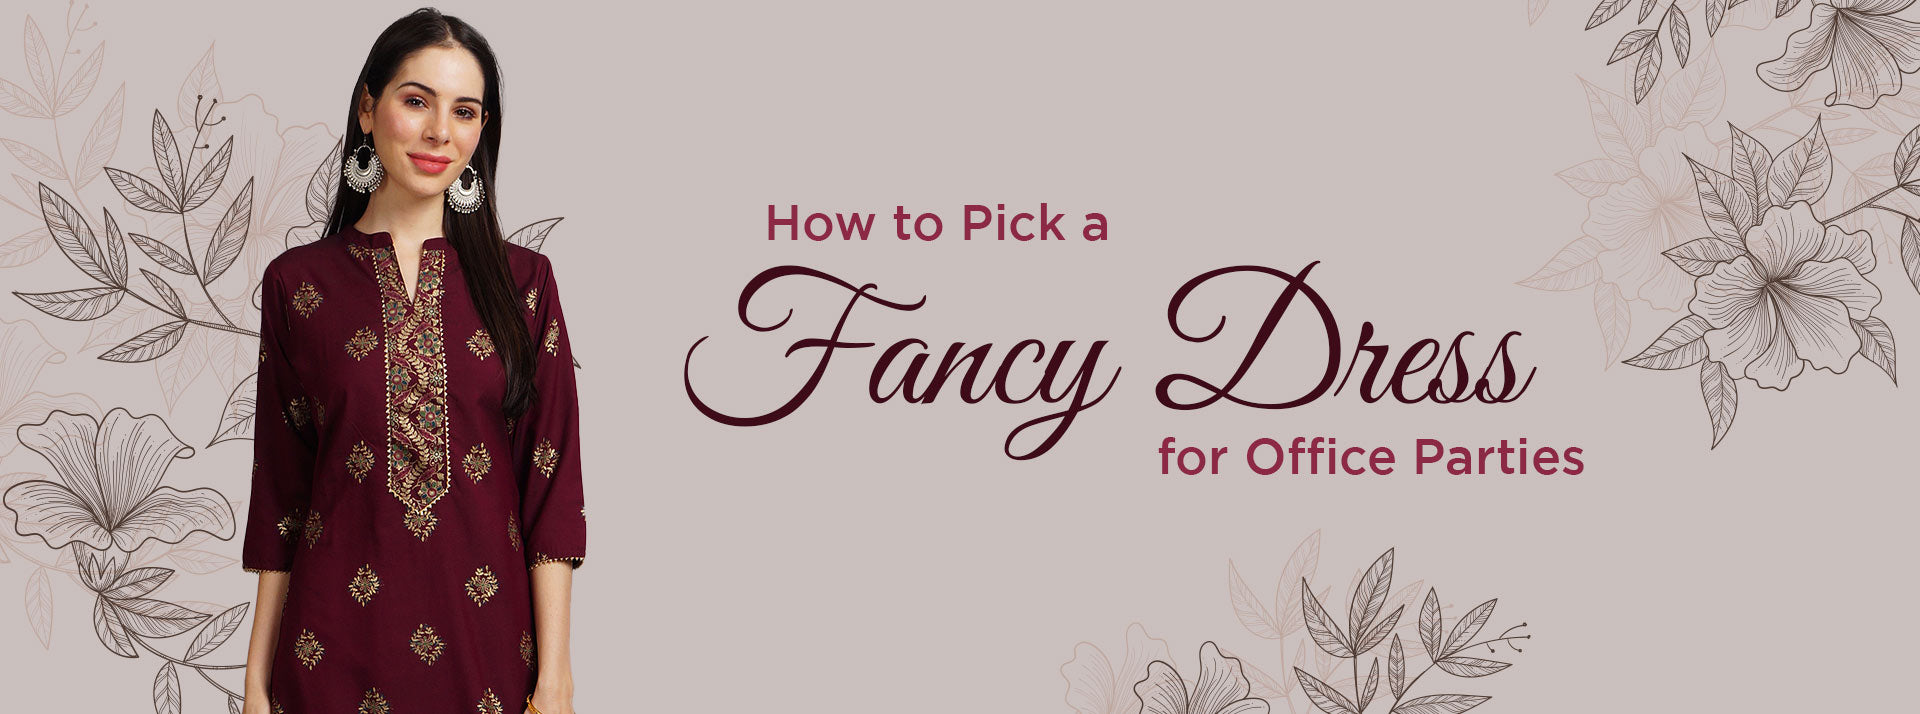 How to Pick a Fancy Dress for Office Parties